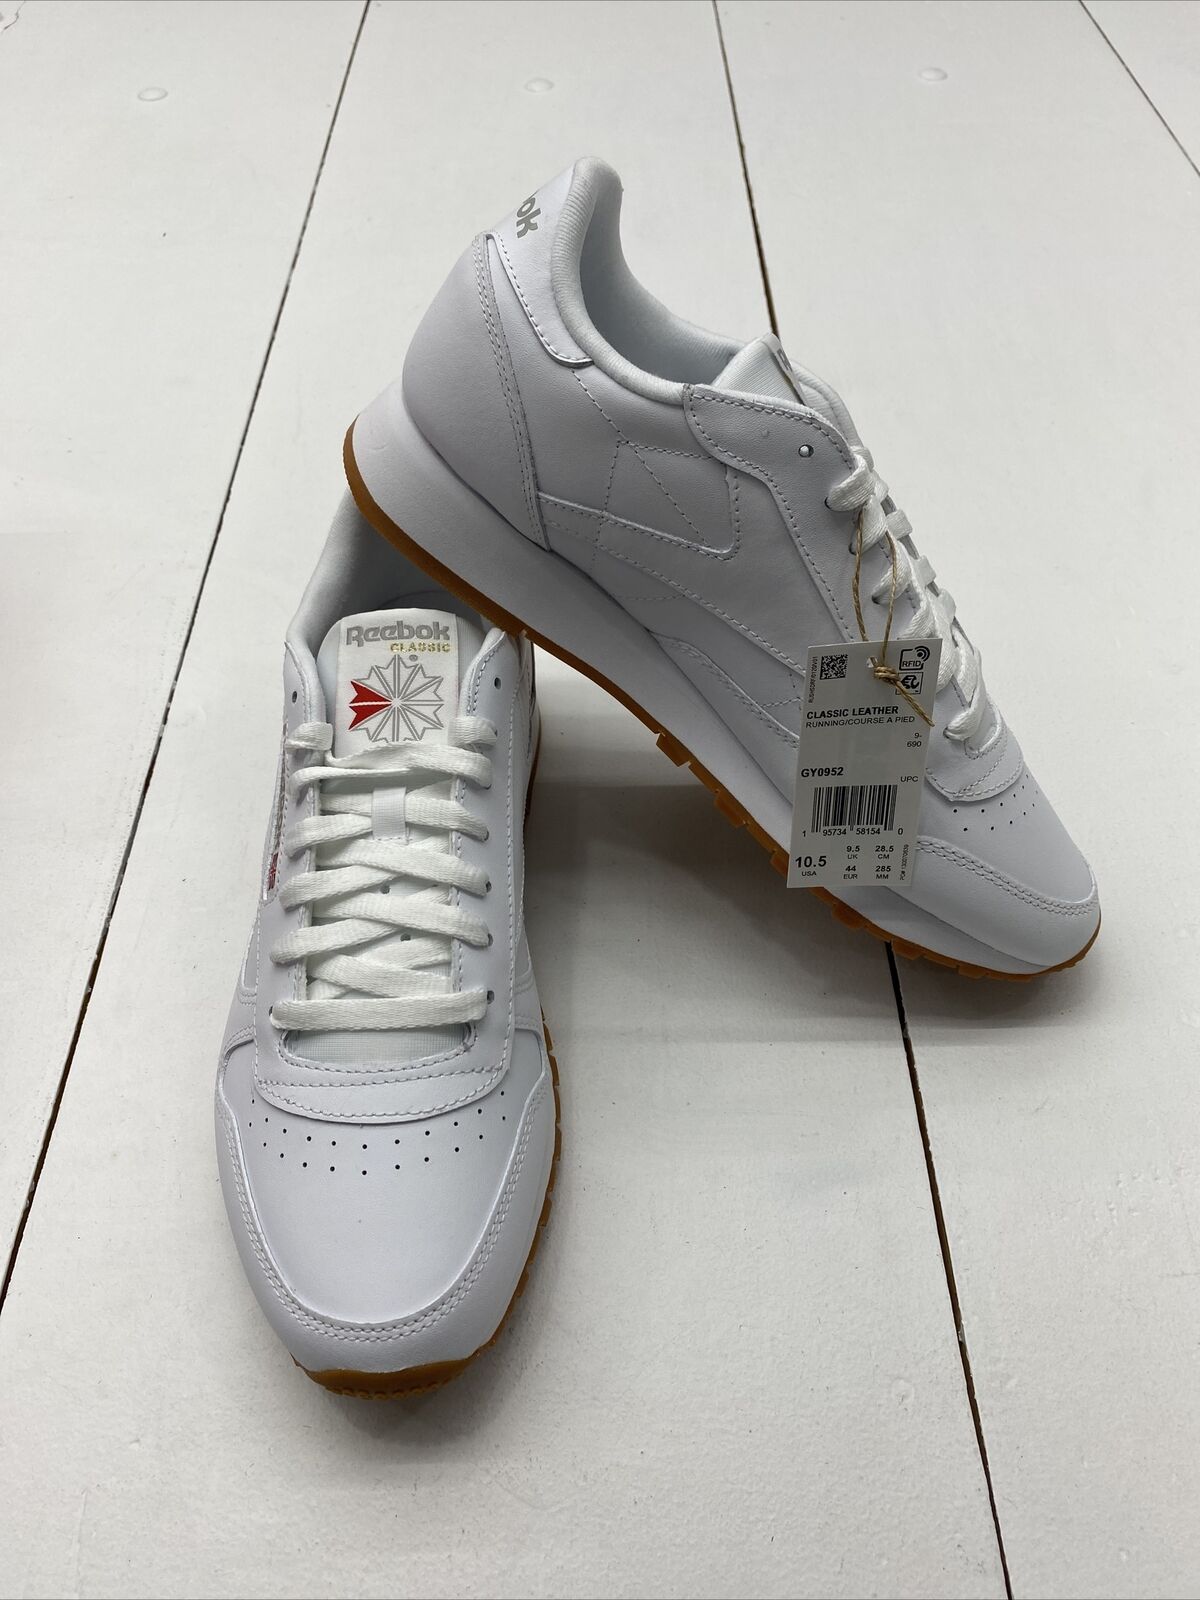 - Women exchange Leather Classic Unisex-Adult beyond GY0952 White Size Reebok Sneaker 10